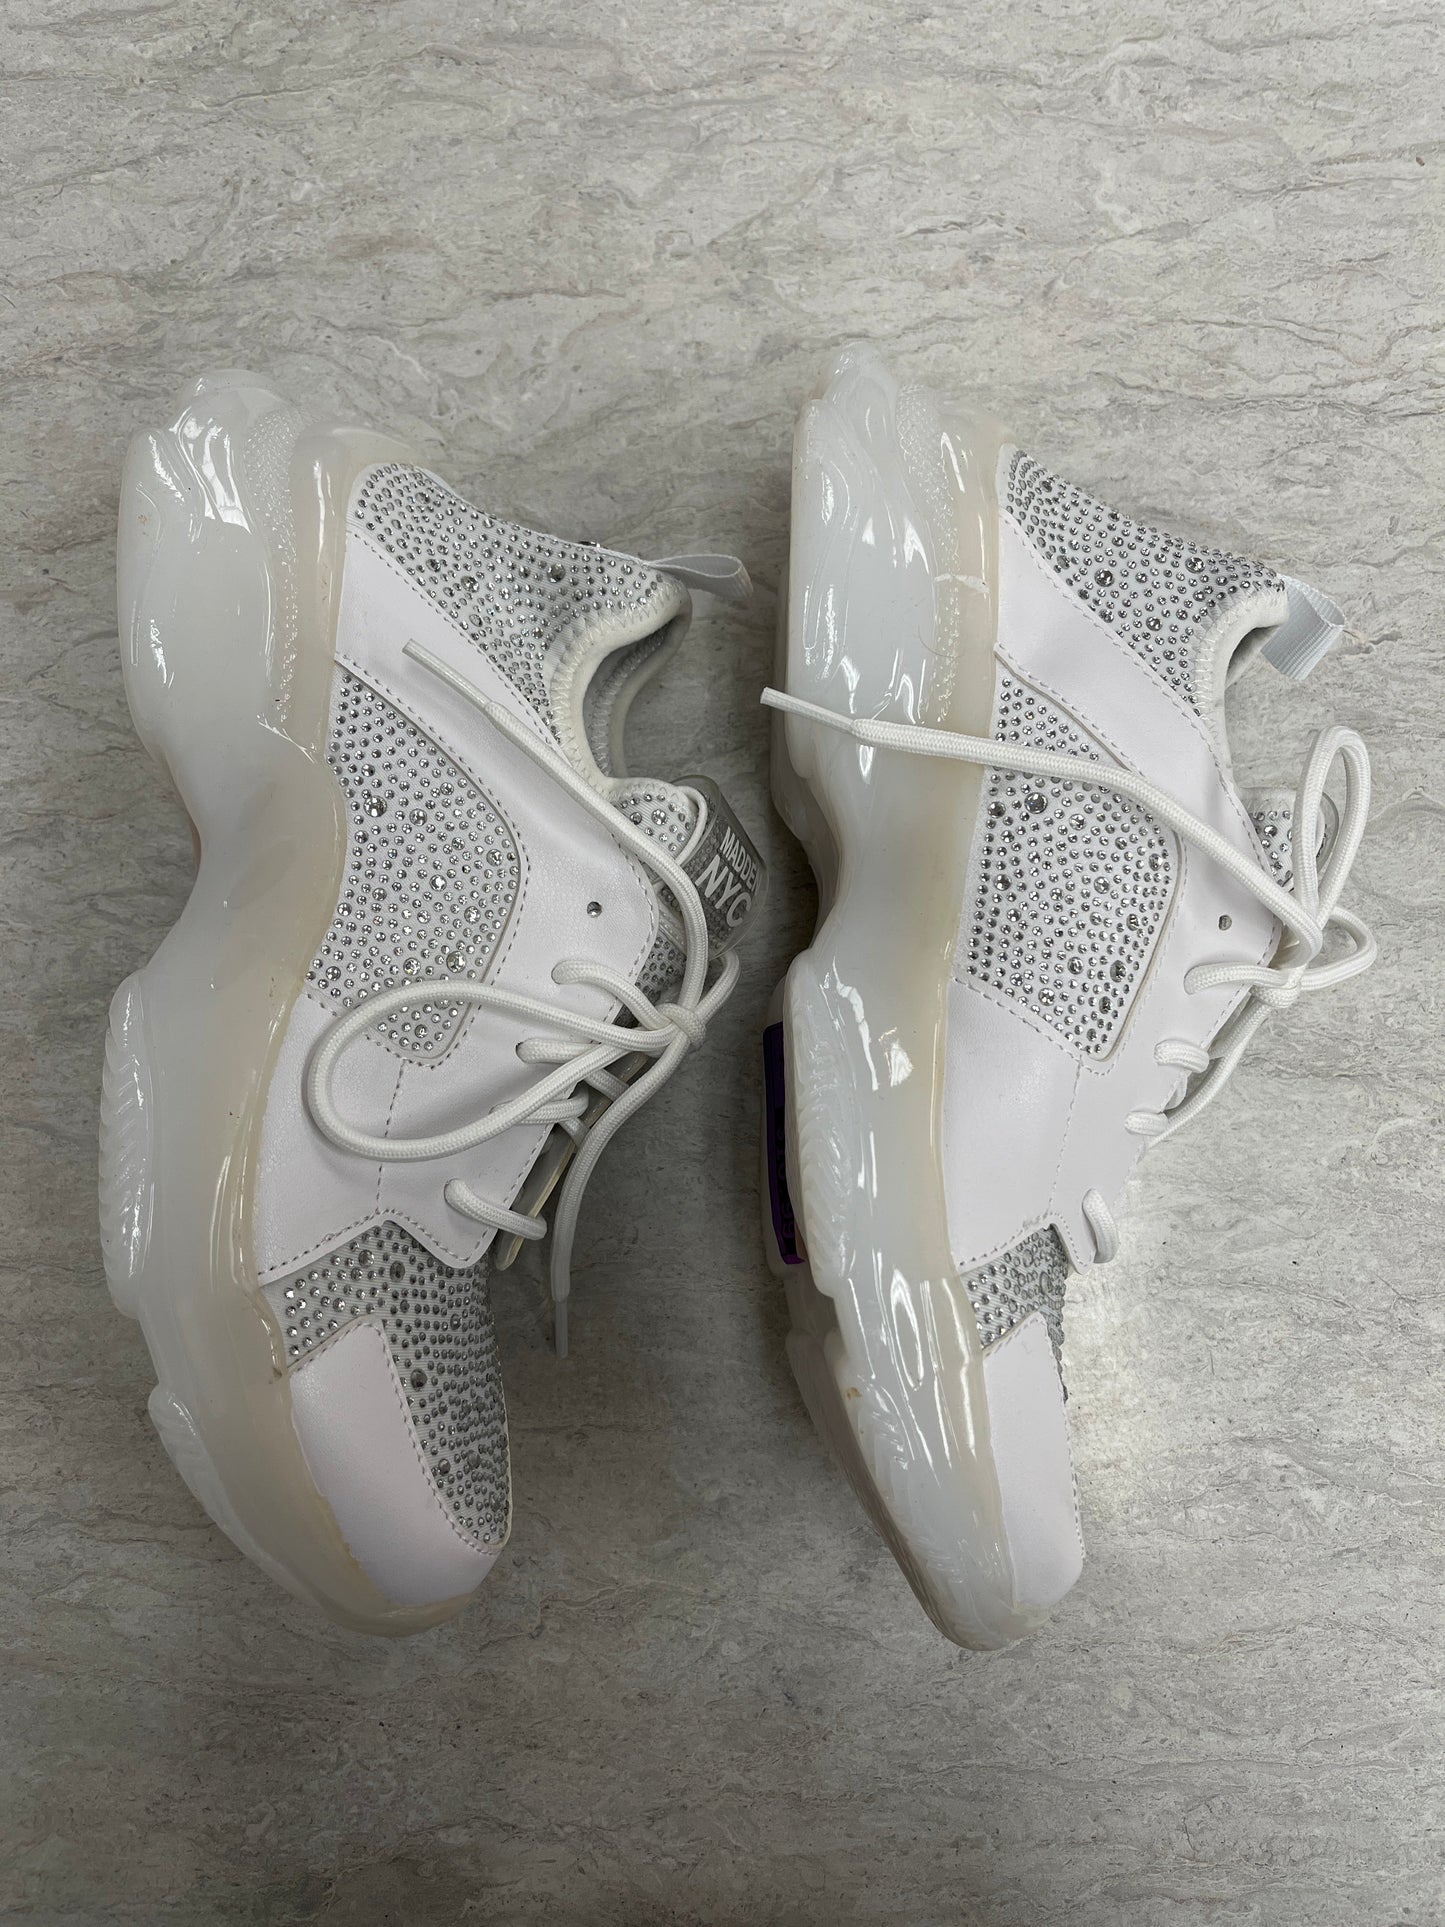 White Shoes Sneakers Madden Nyc, Size 9.5